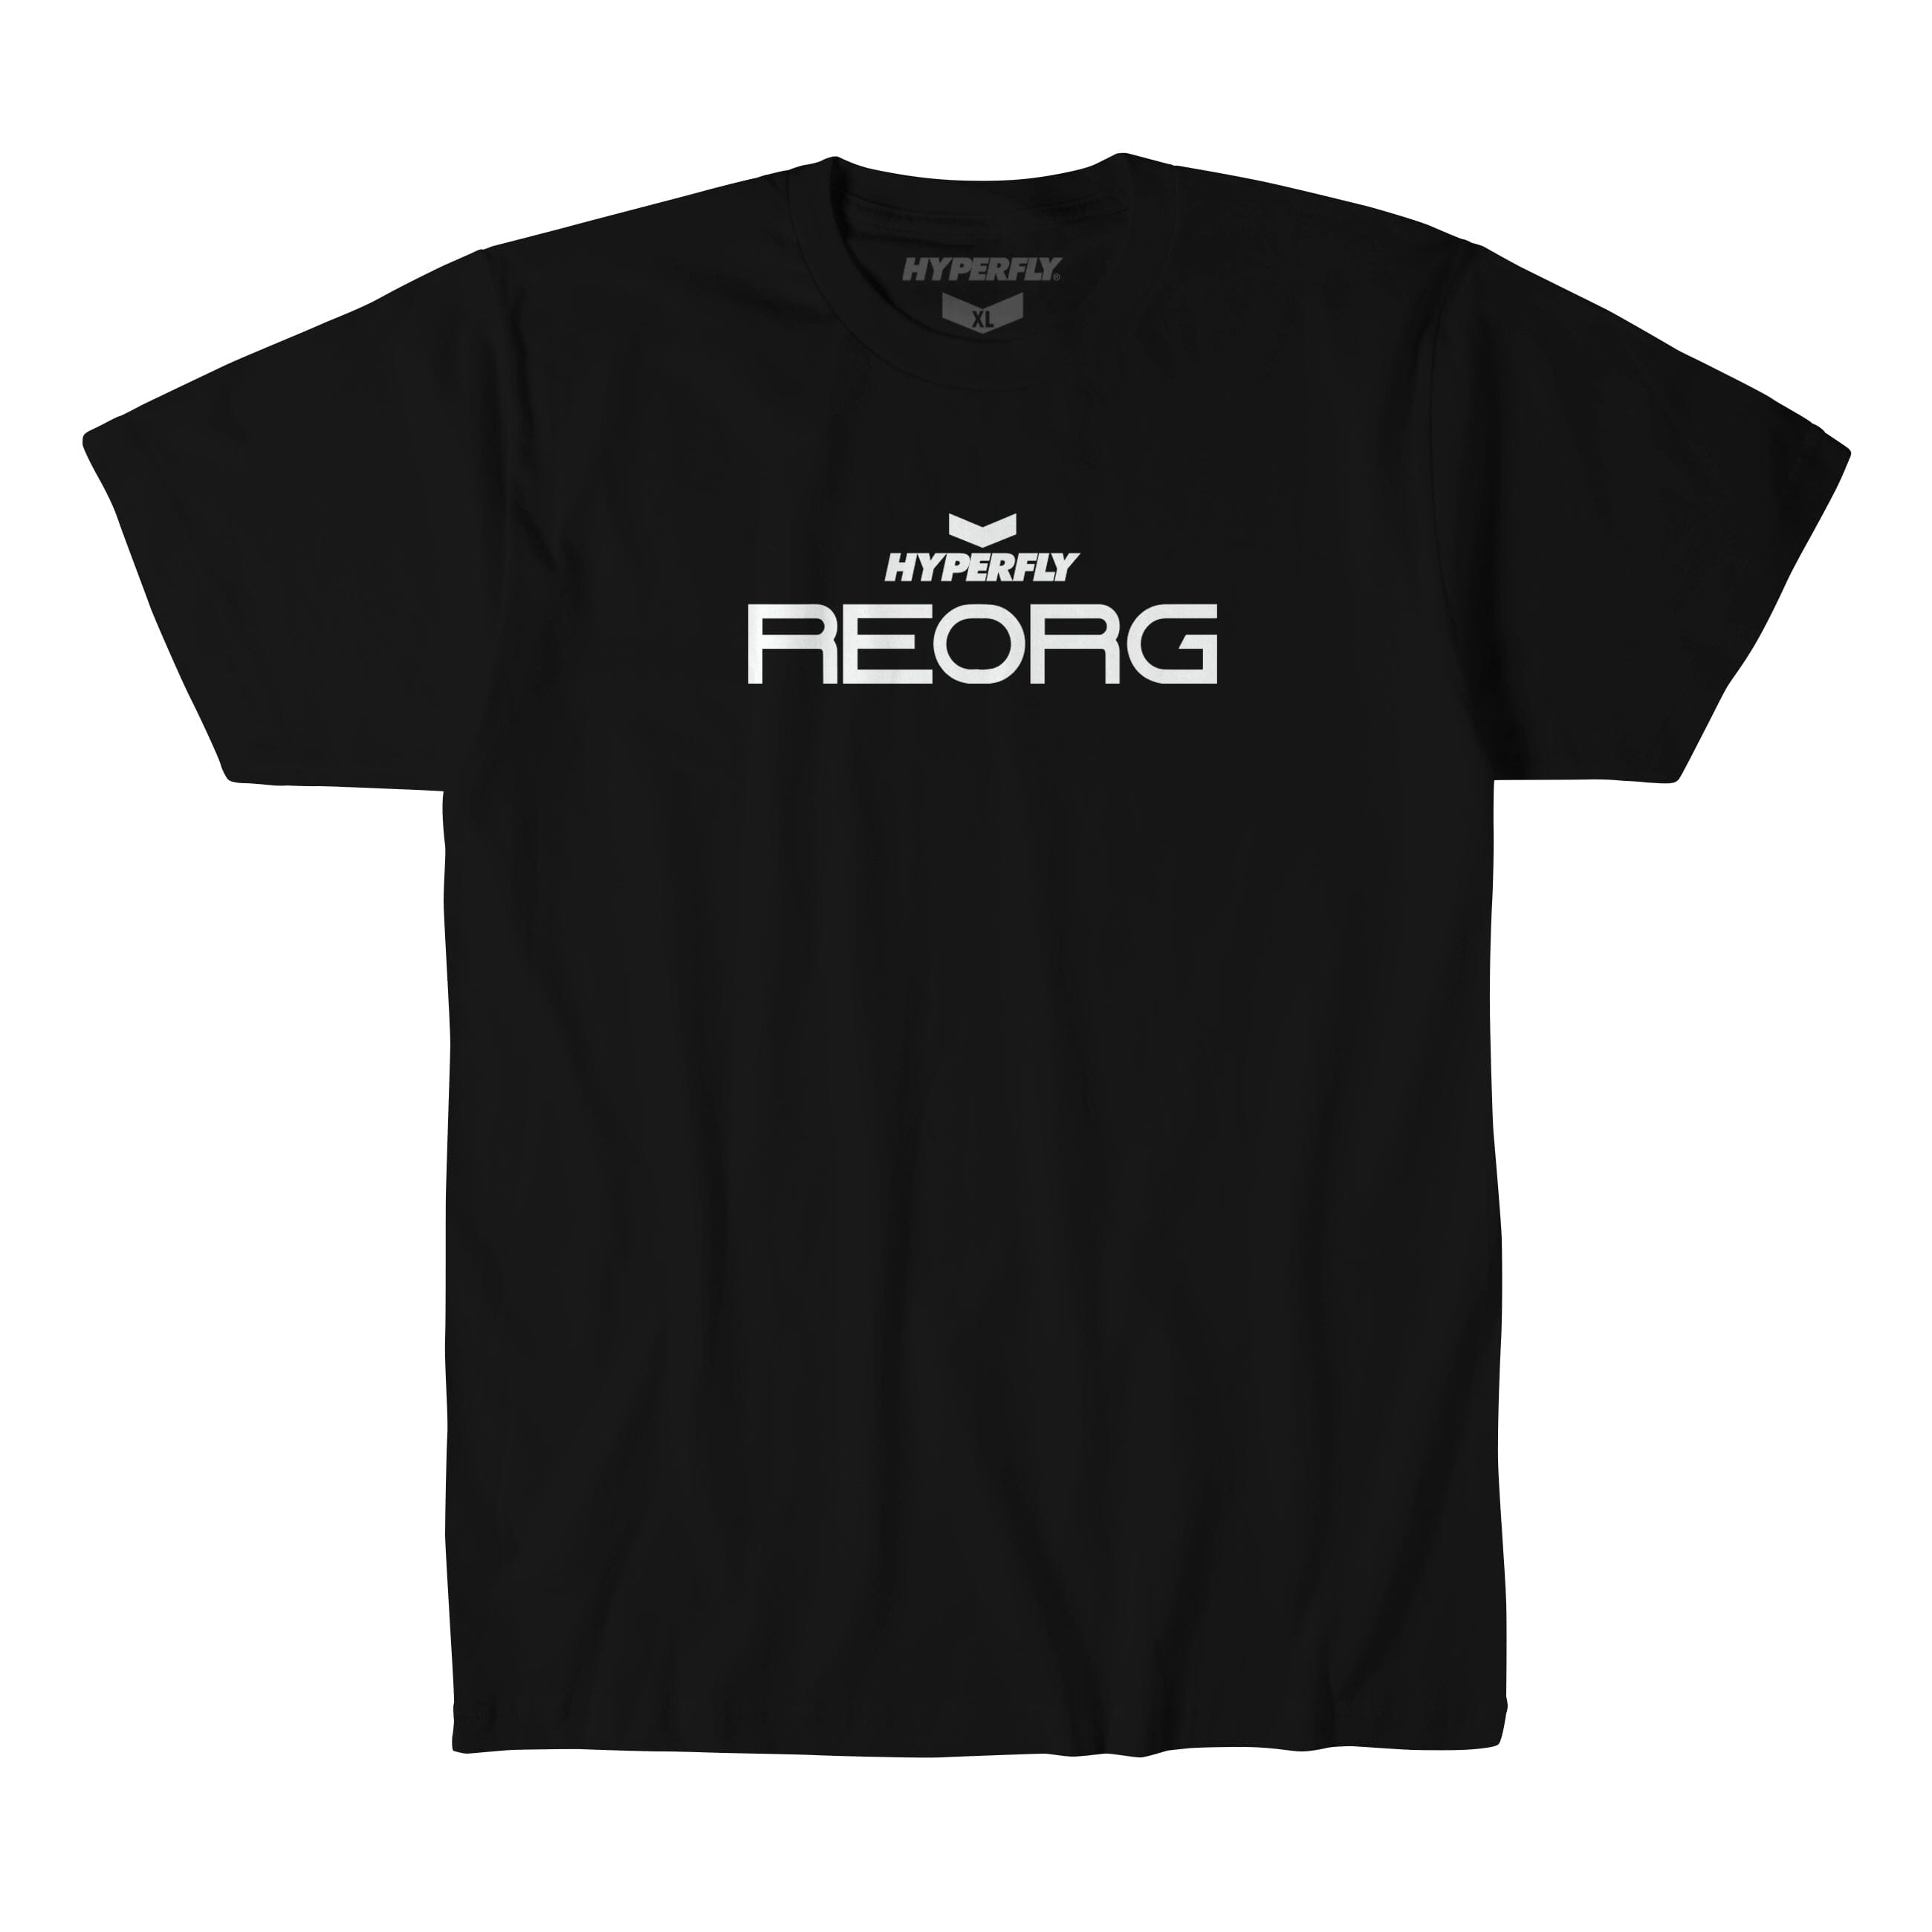 REORG + Hyperfly YCTH Tee (Preorder) Hyperfly X Small 